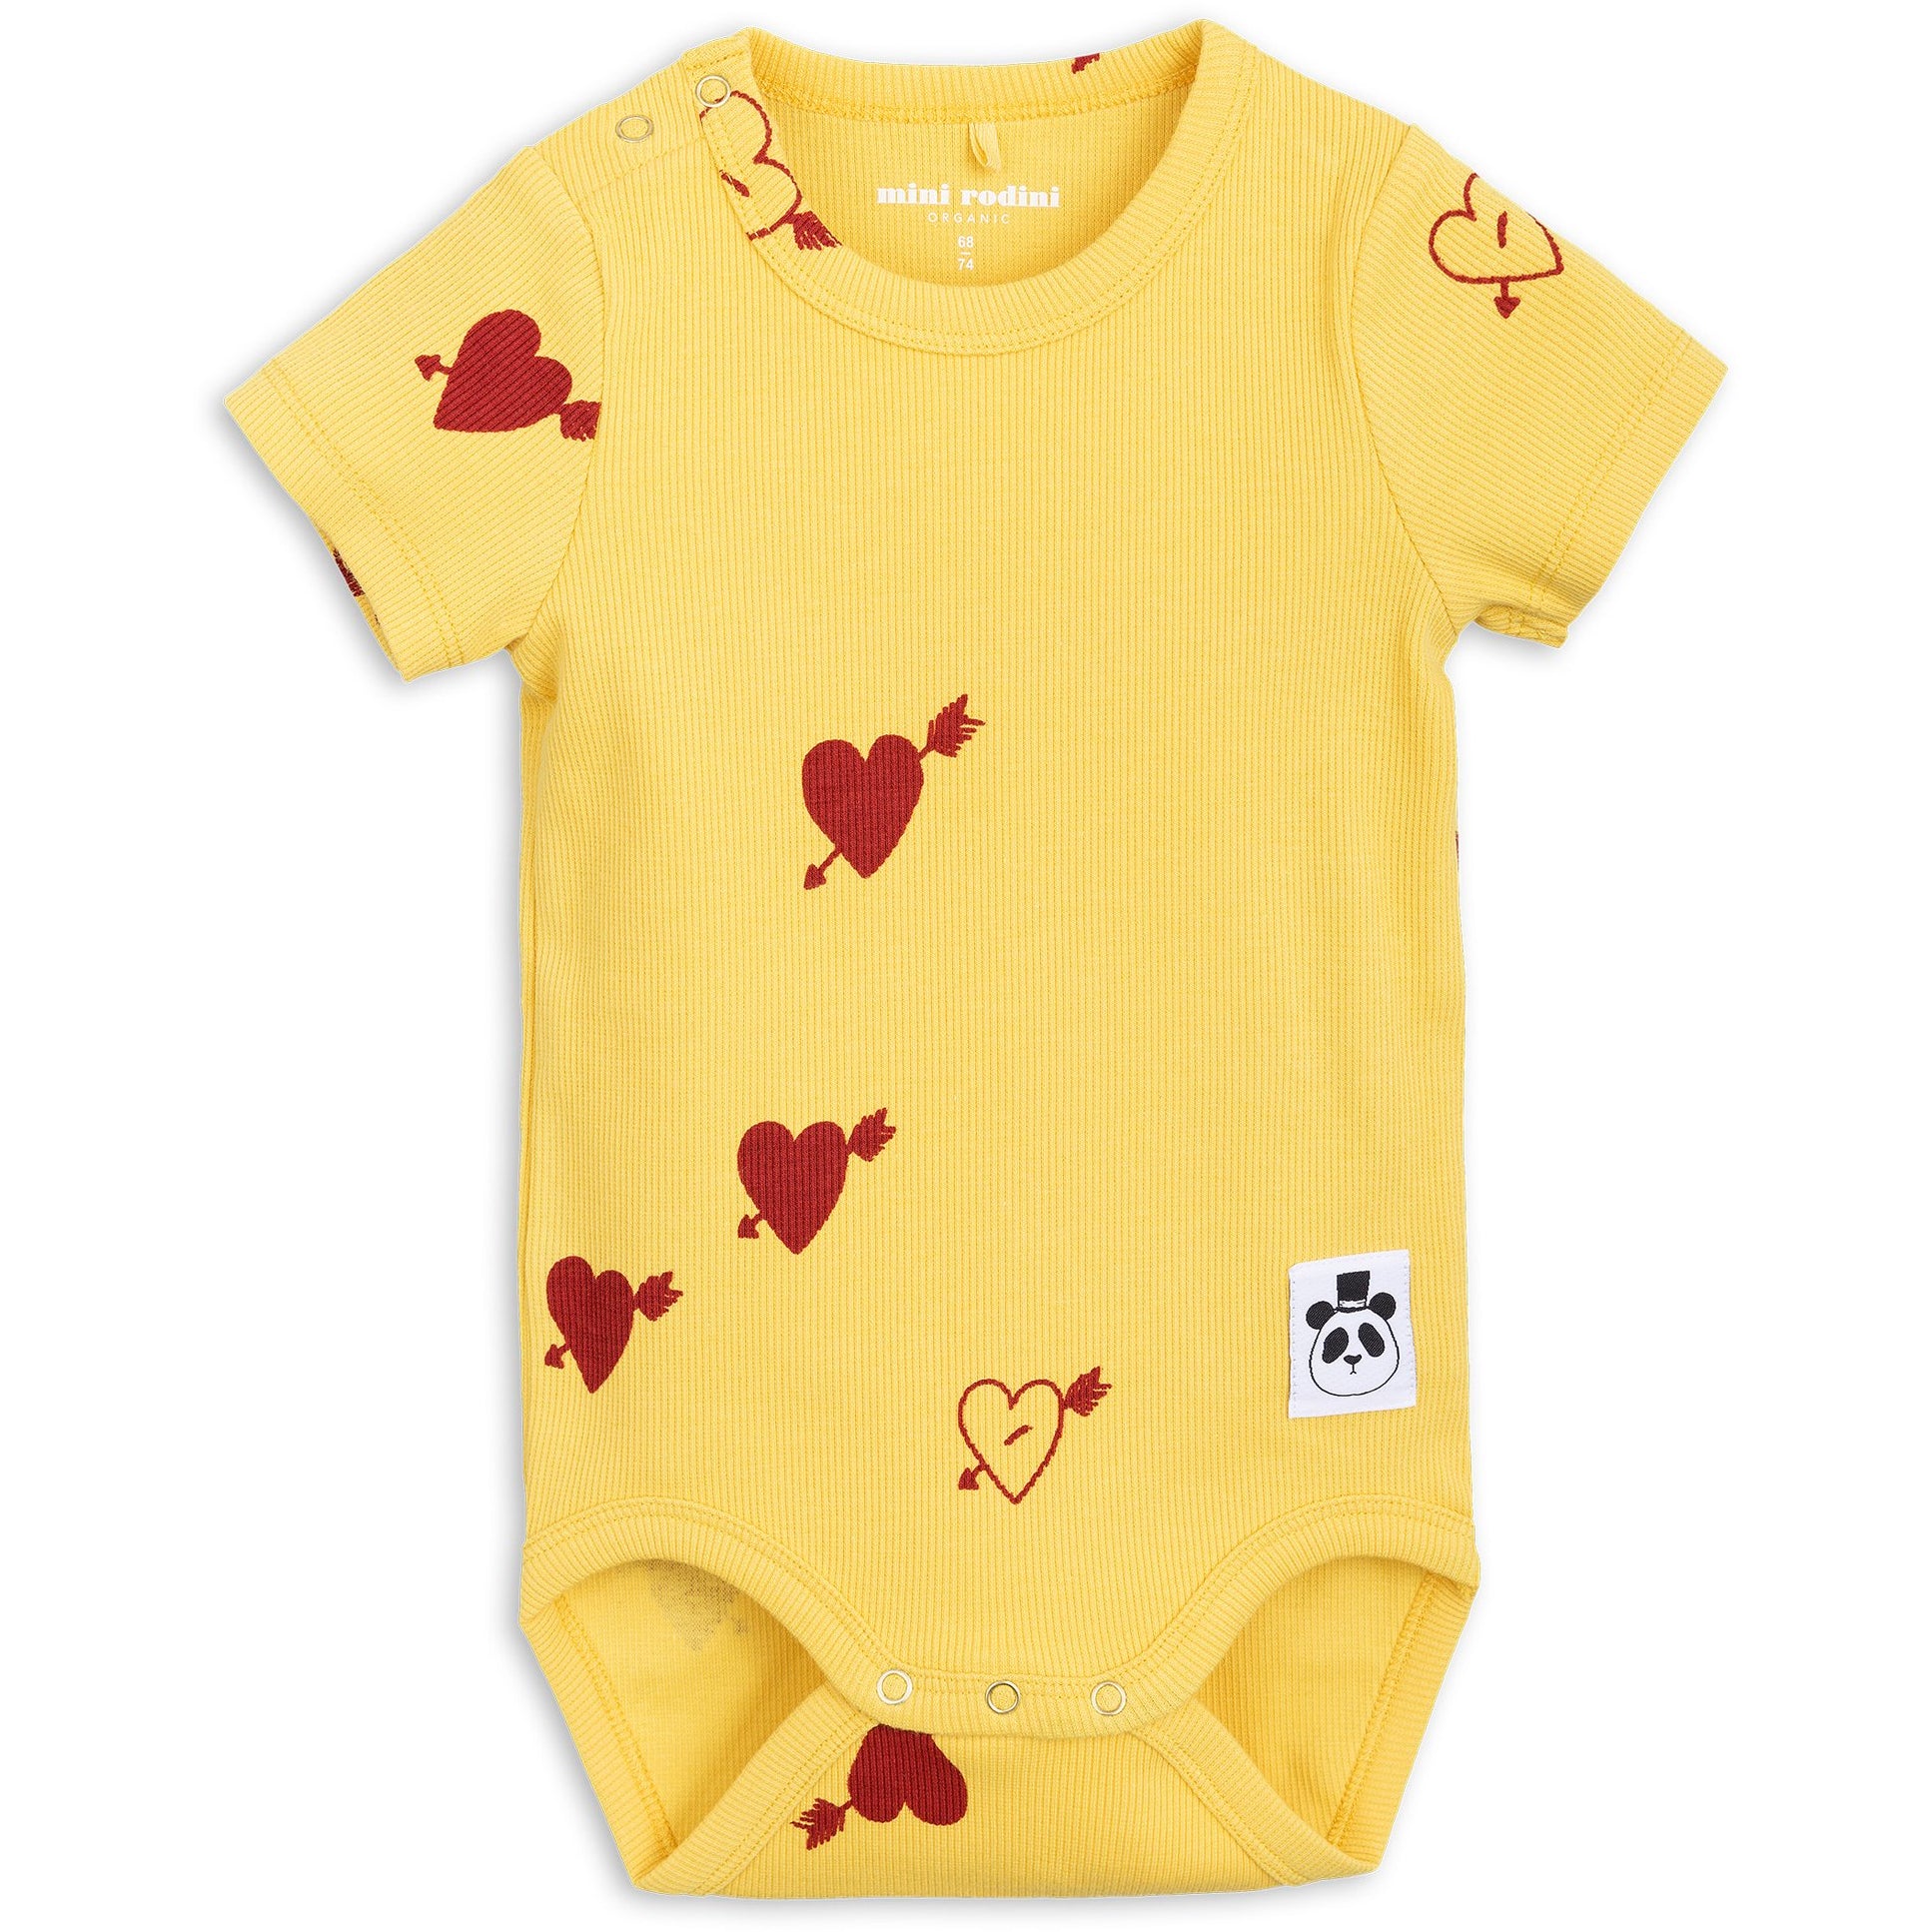 Tiny Clothing Labels: Hearts Kids' Clothing Labels